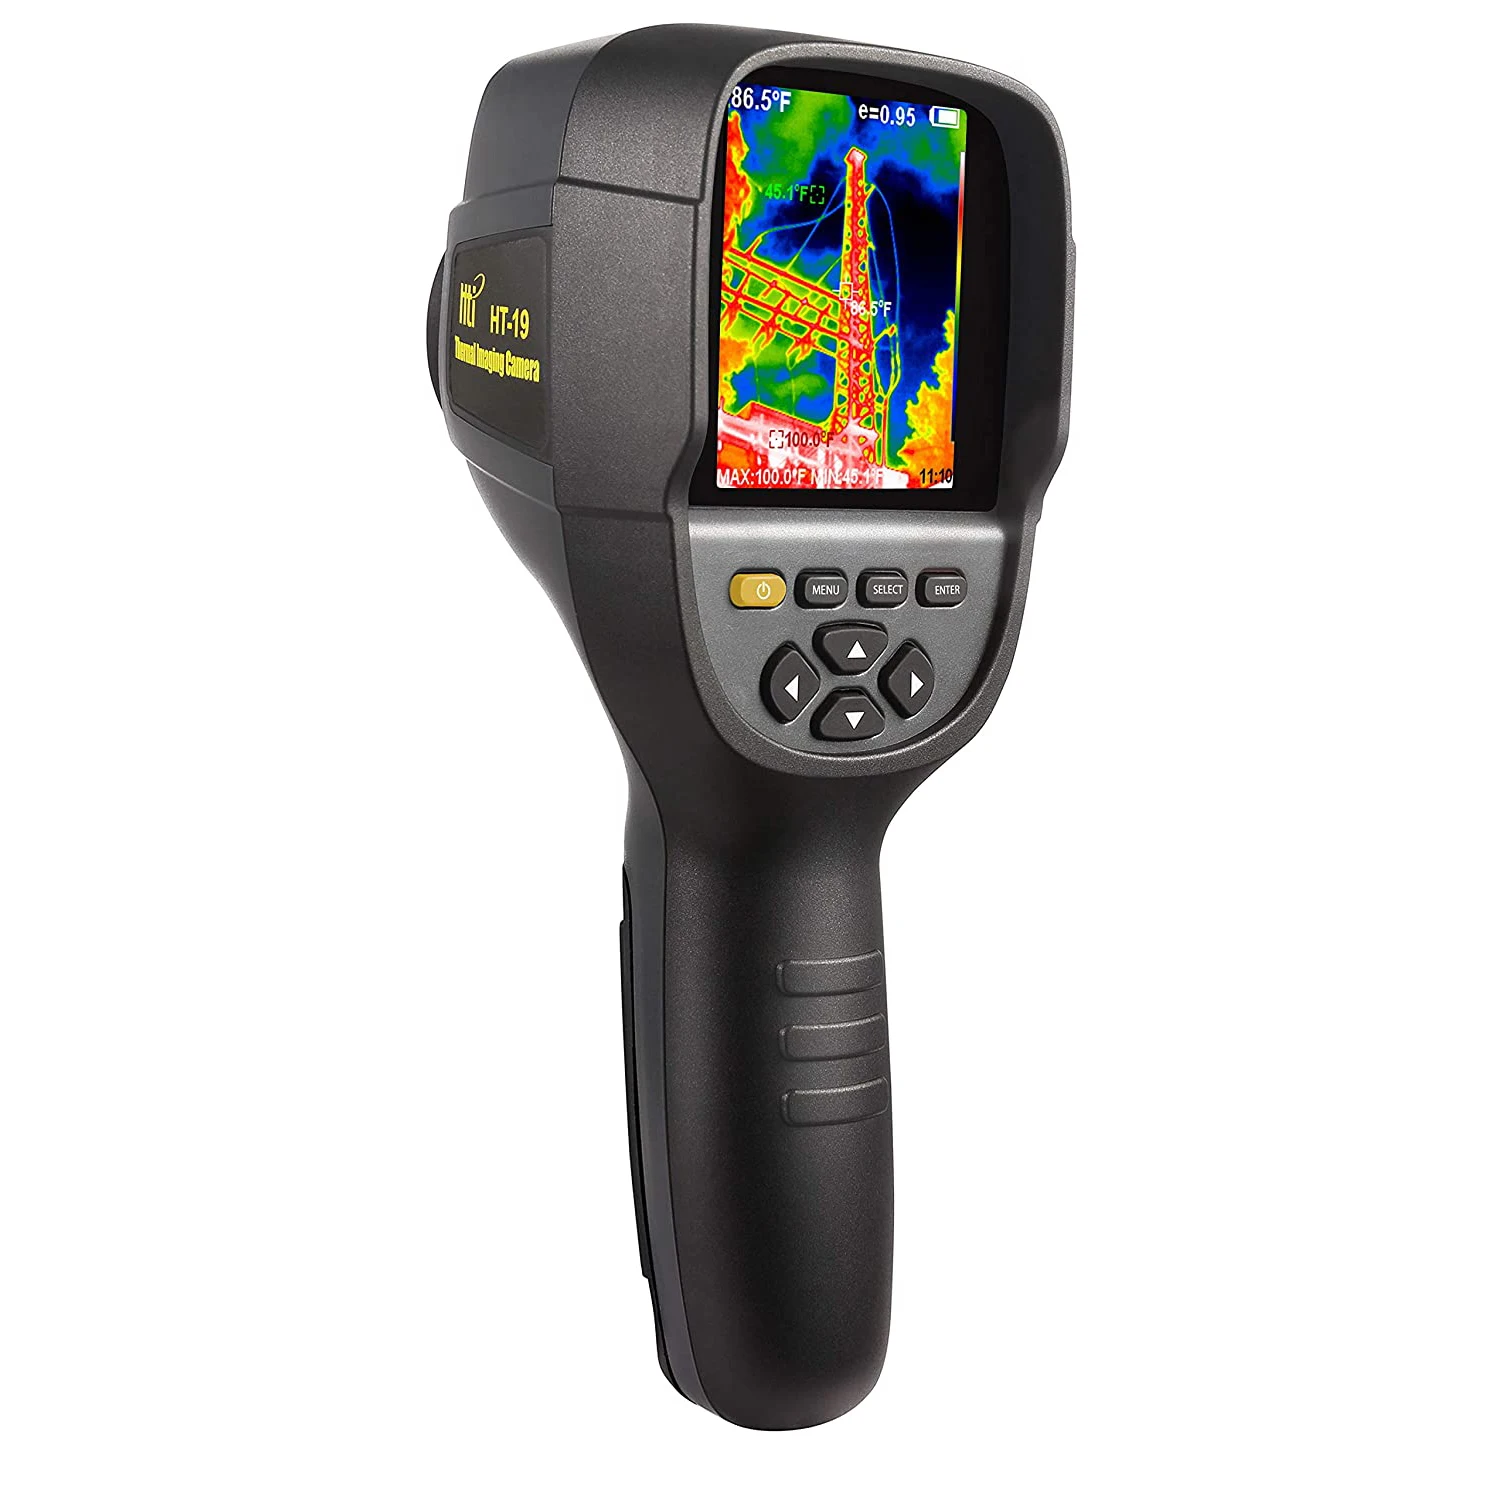 

320 x 240 HT-19 New Higher Resolution IR Infrared Thermal Imaging Camera with 300,000 Pixels ,Sharp 3.2" Color Display Screen